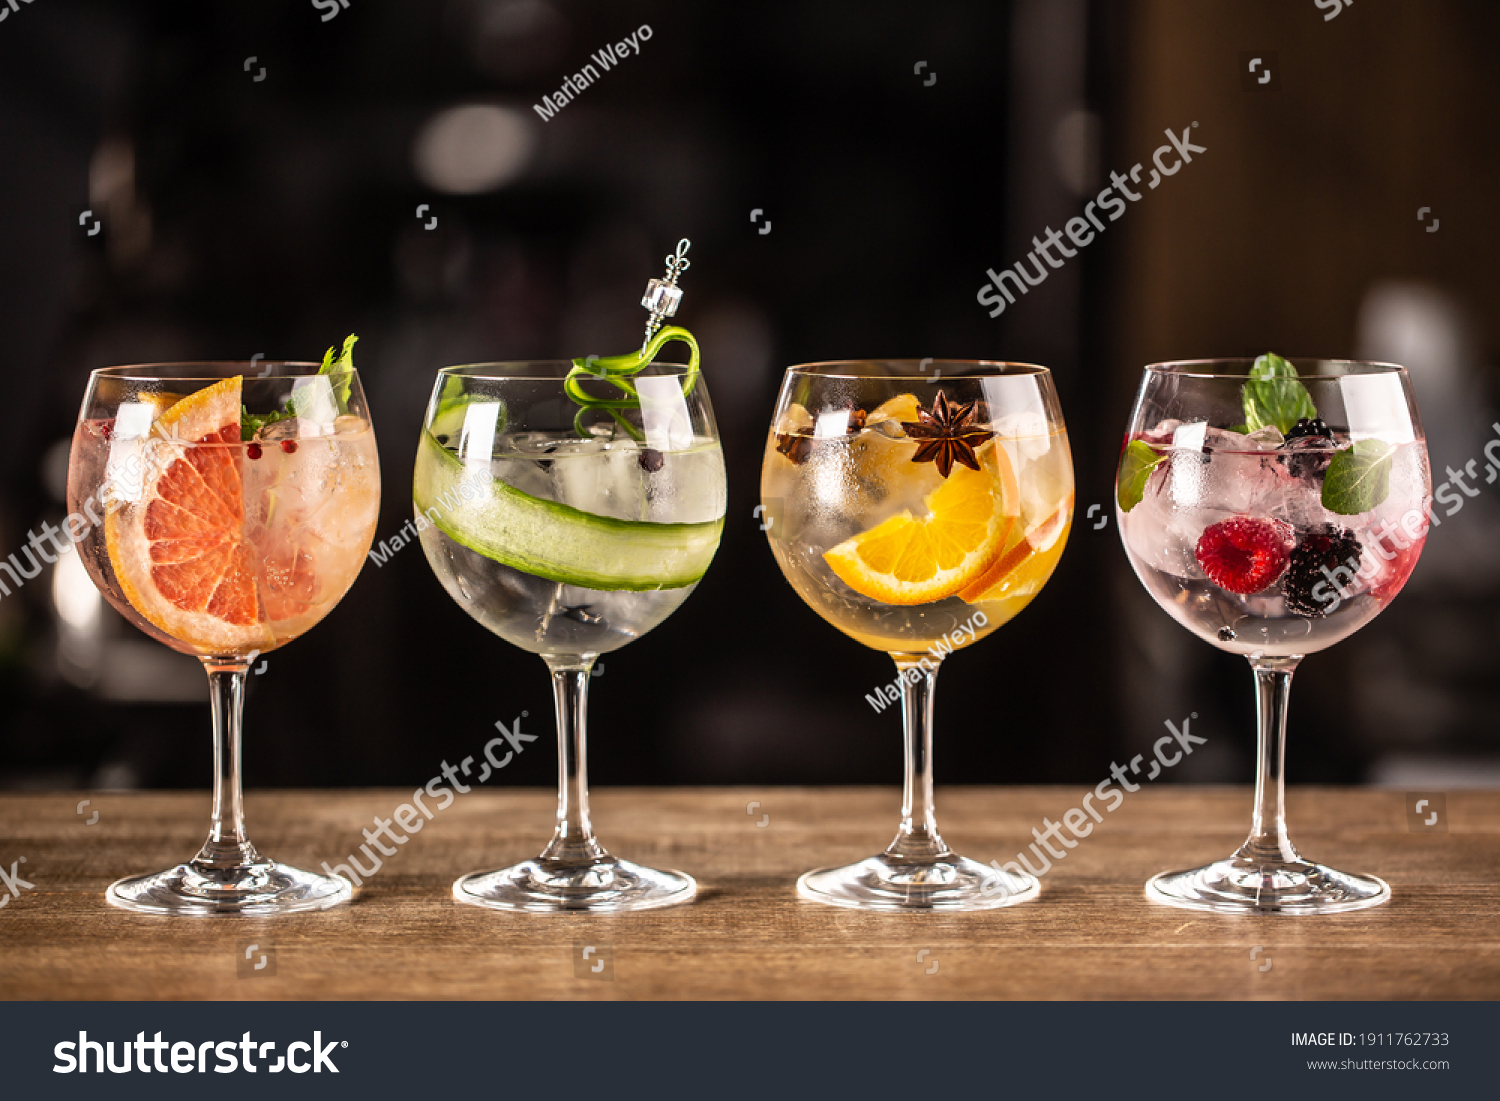 Gin tonic long drink as a classic cocktail in various forms with garnish in individual glasses such as orange, grapefruit, cucumber or berries. #1911762733